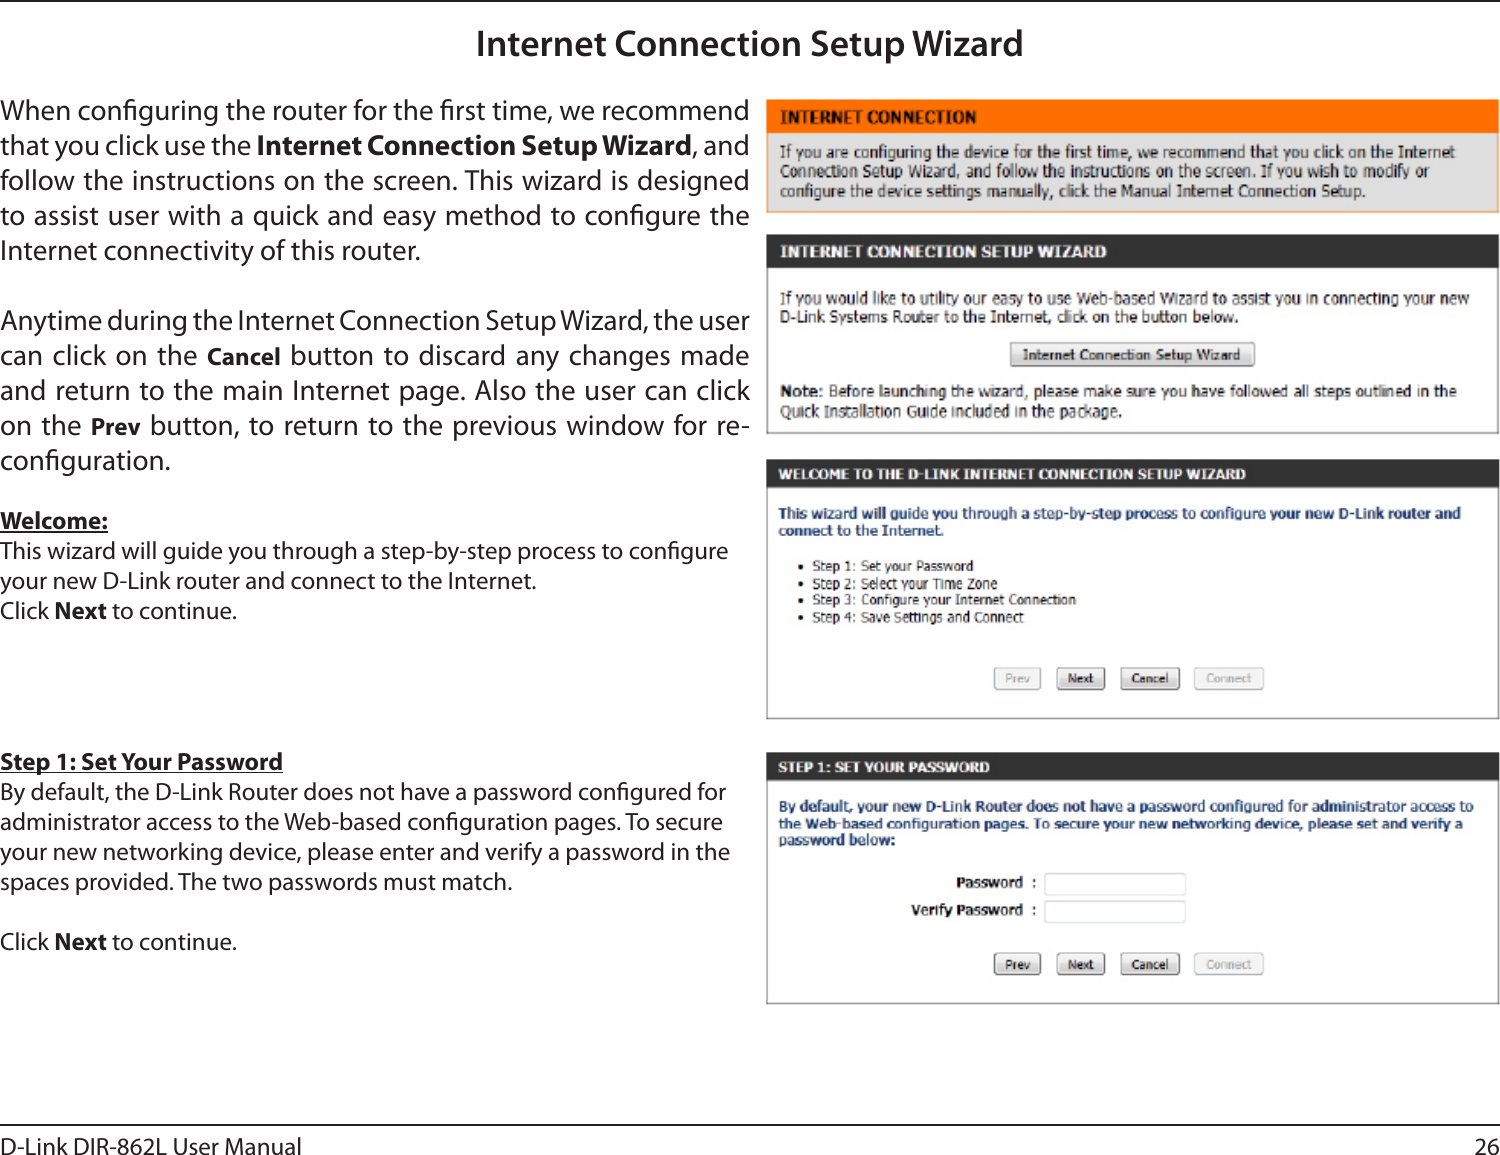 26D-Link DIR-862L User ManualInternet Connection Setup WizardWhen conguring the router for the rst time, we recommend that you click use the Internet Connection Setup Wizard, and follow the instructions on the screen. This wizard is designed to assist user with a quick and easy method to congure the Internet connectivity of this router.Anytime during the Internet Connection Setup Wizard, the user can click on the Cancel button to discard any changes made and return to the main Internet page. Also the user can click on the Prev button, to return to the previous window for re-conguration.Welcome:This wizard will guide you through a step-by-step process to congure your new D-Link router and connect to the Internet. Click Next to continue.Step 1: Set Your PasswordBy default, the D-Link Router does not have a password congured for administrator access to the Web-based conguration pages. To secure your new networking device, please enter and verify a password in the spaces provided. The two passwords must match.Click Next to continue.